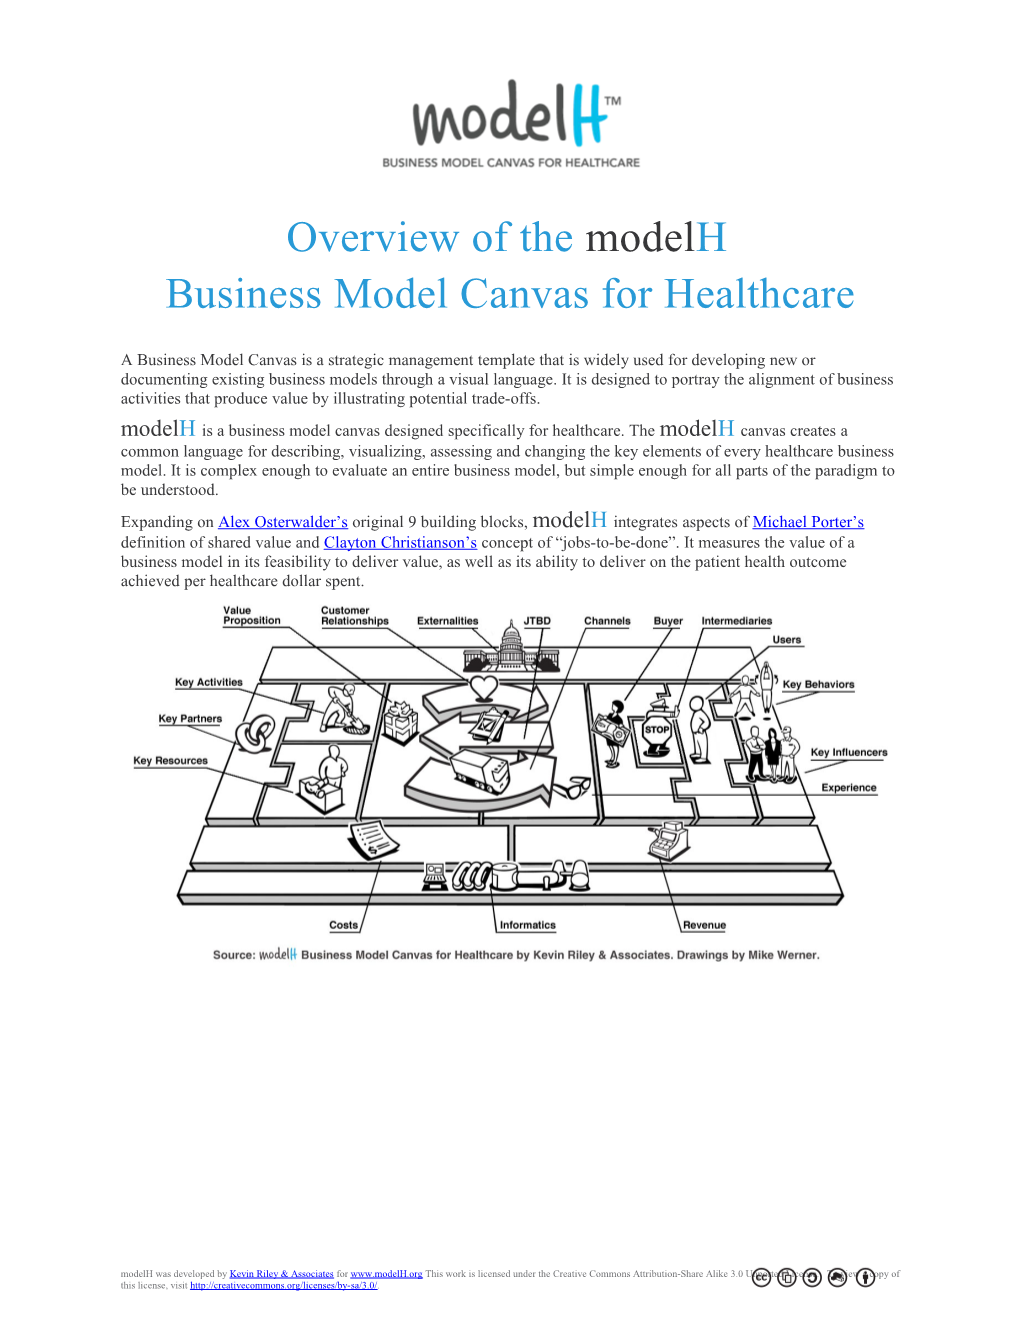 Business Model Canvas for Healthcare